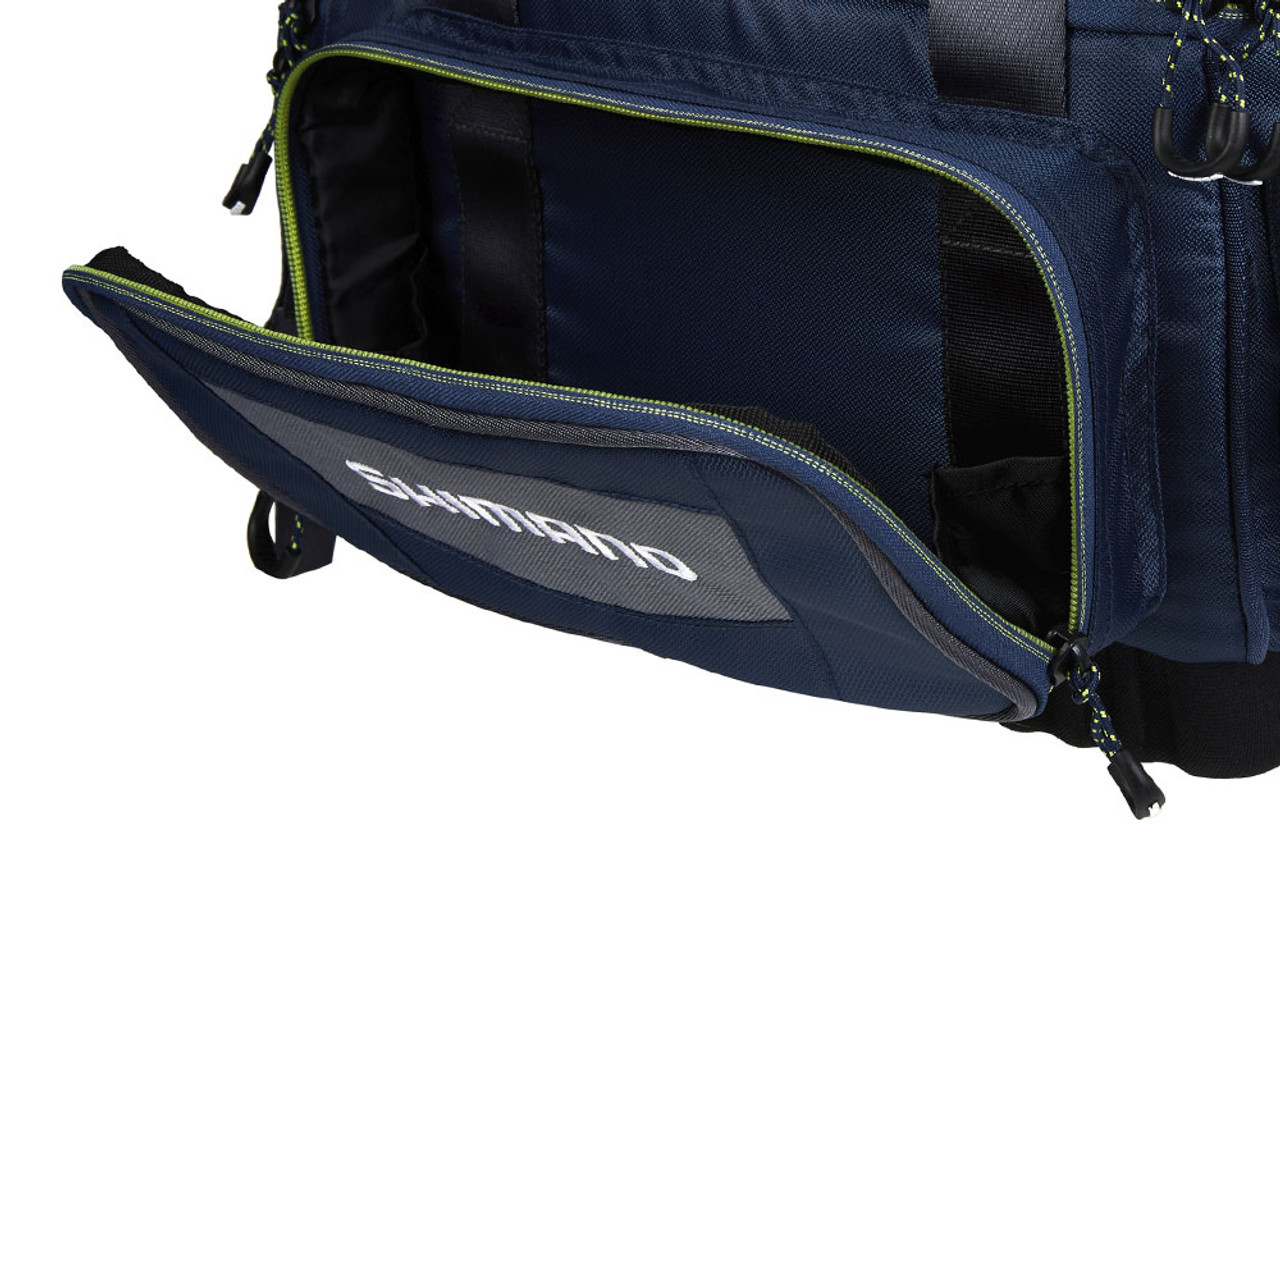 Buy Offering Discounts Shimano Tackle Bags - Tackle Storage Bag - With 54%  Discount!